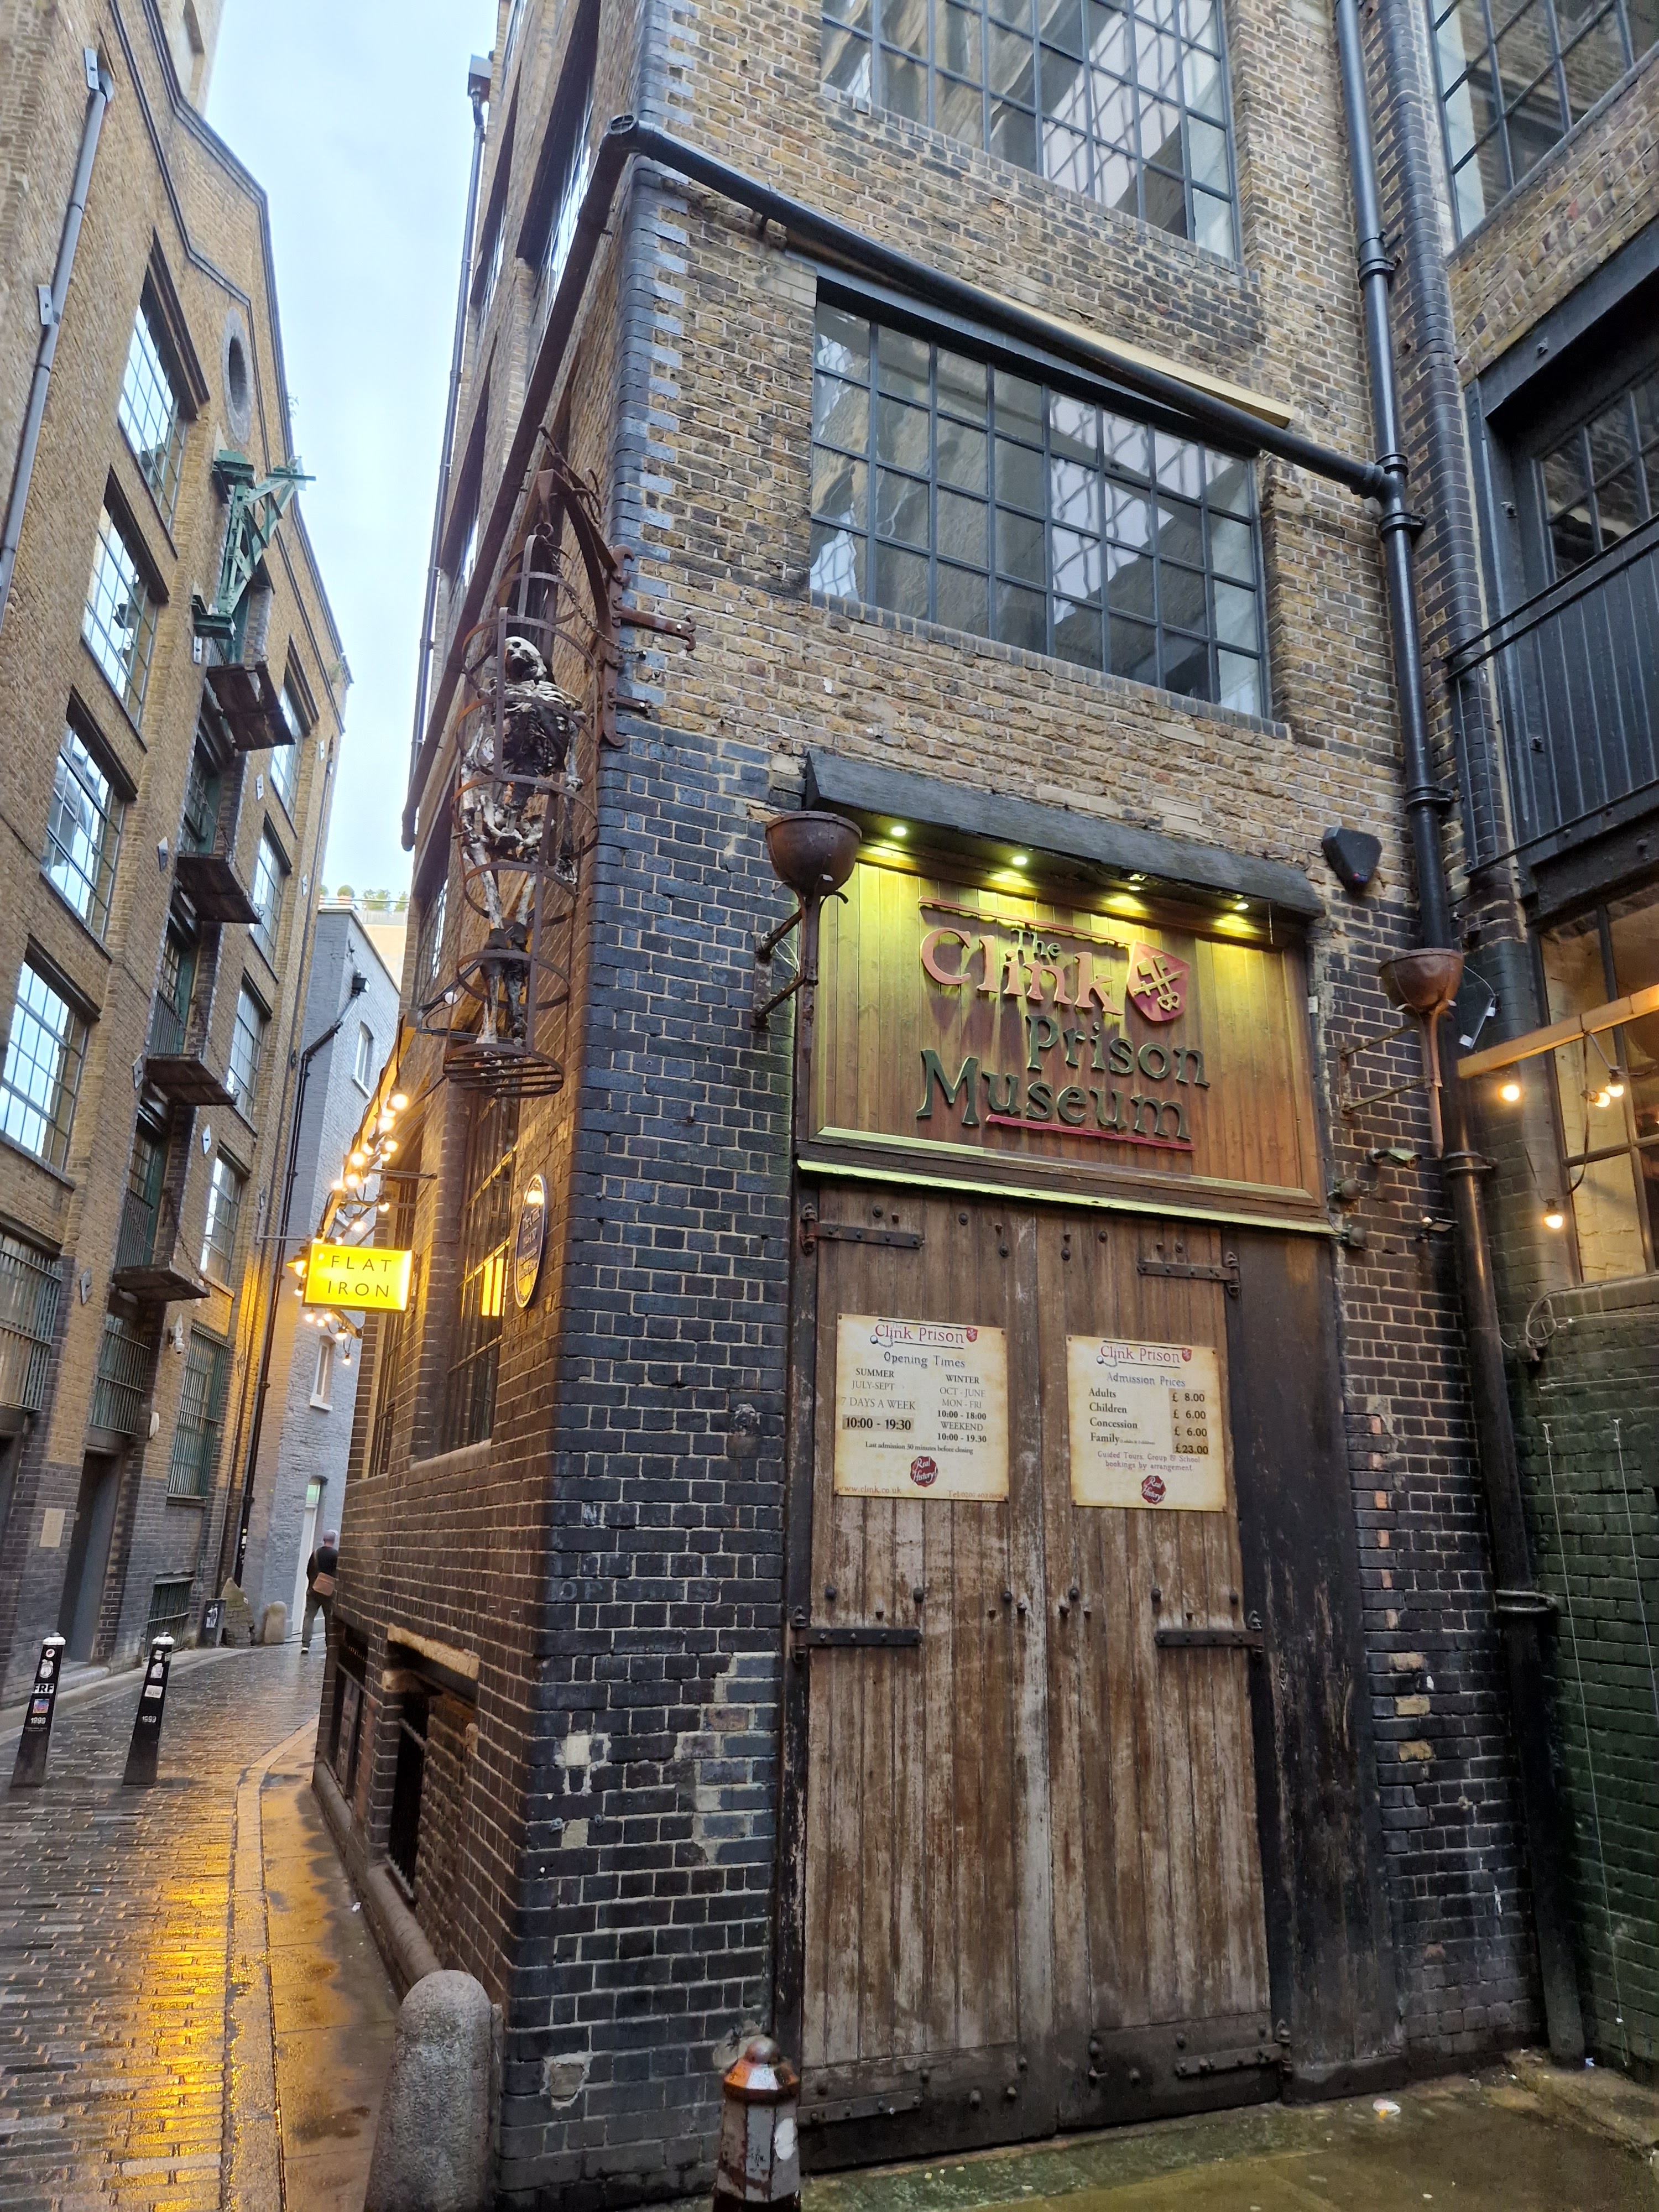 Picture of a place: The Clink Prison Museum